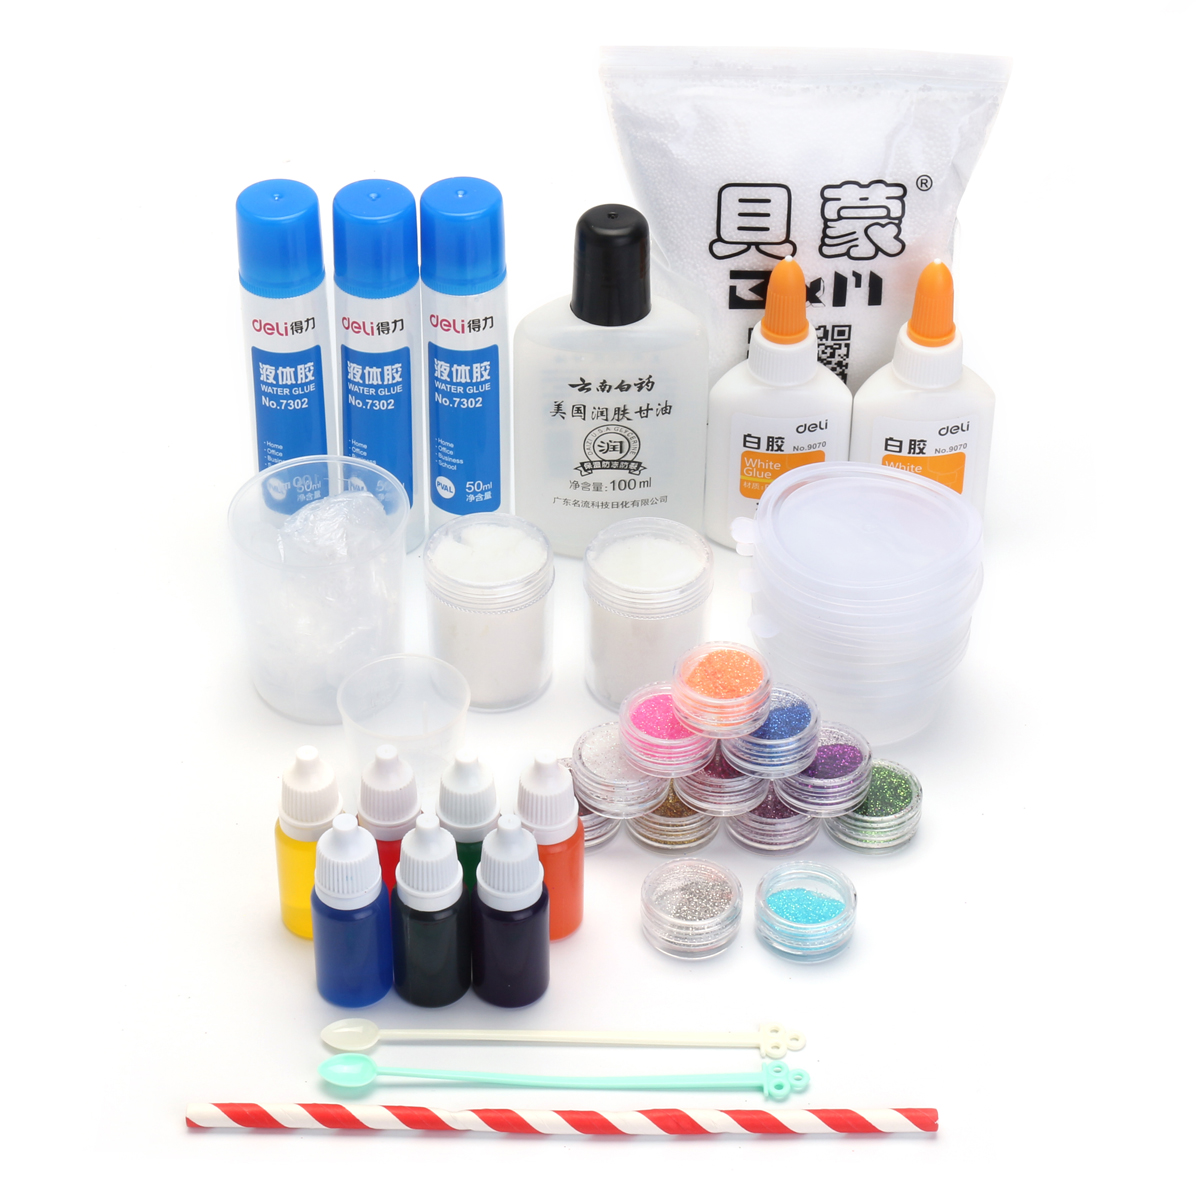 DIY-Slime-Kit-Fluffy-Crystal-Borax-Gliter-Powder-Glue-Play-Game-Kids-Toy-Adults-Stress-Reliever-Gift-1205725-1